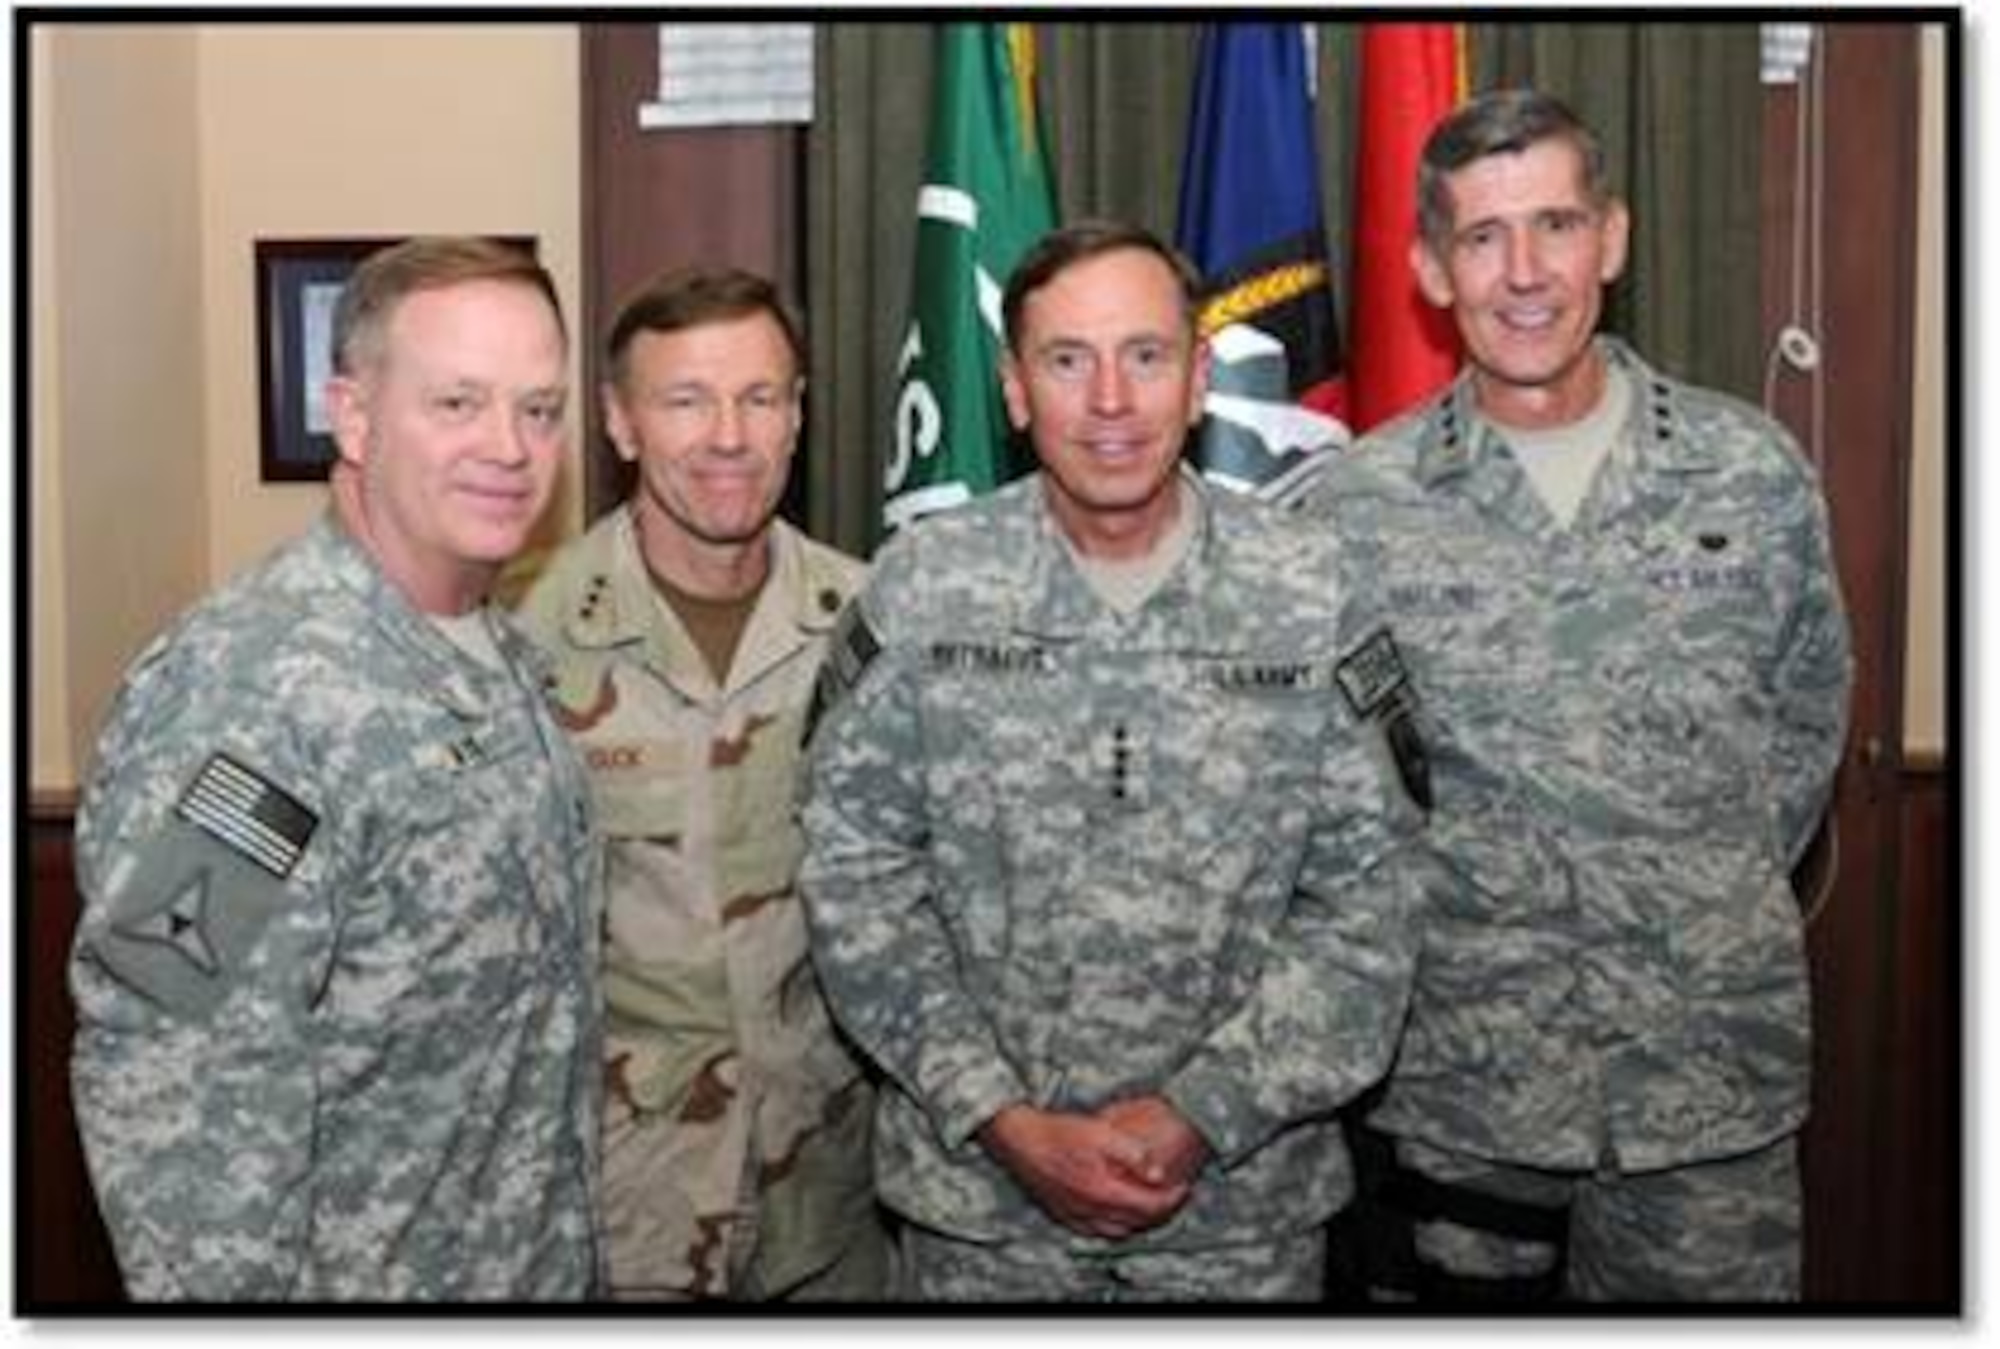 L-R: Major General Clyde J. Tate II, the Deputy Judge Advocate General for the Army; Vice Admiral James W. Houck, The Judge Advocate General for the Navy; General David H. Petraeus, Commander of International Security Assistance Force & Commander of U.S. Forces Afghanistan; and Lieutenant General Richard C. Harding, The Judge Advocate General for the Air Force pose together during a recent visit to Afghanistan.